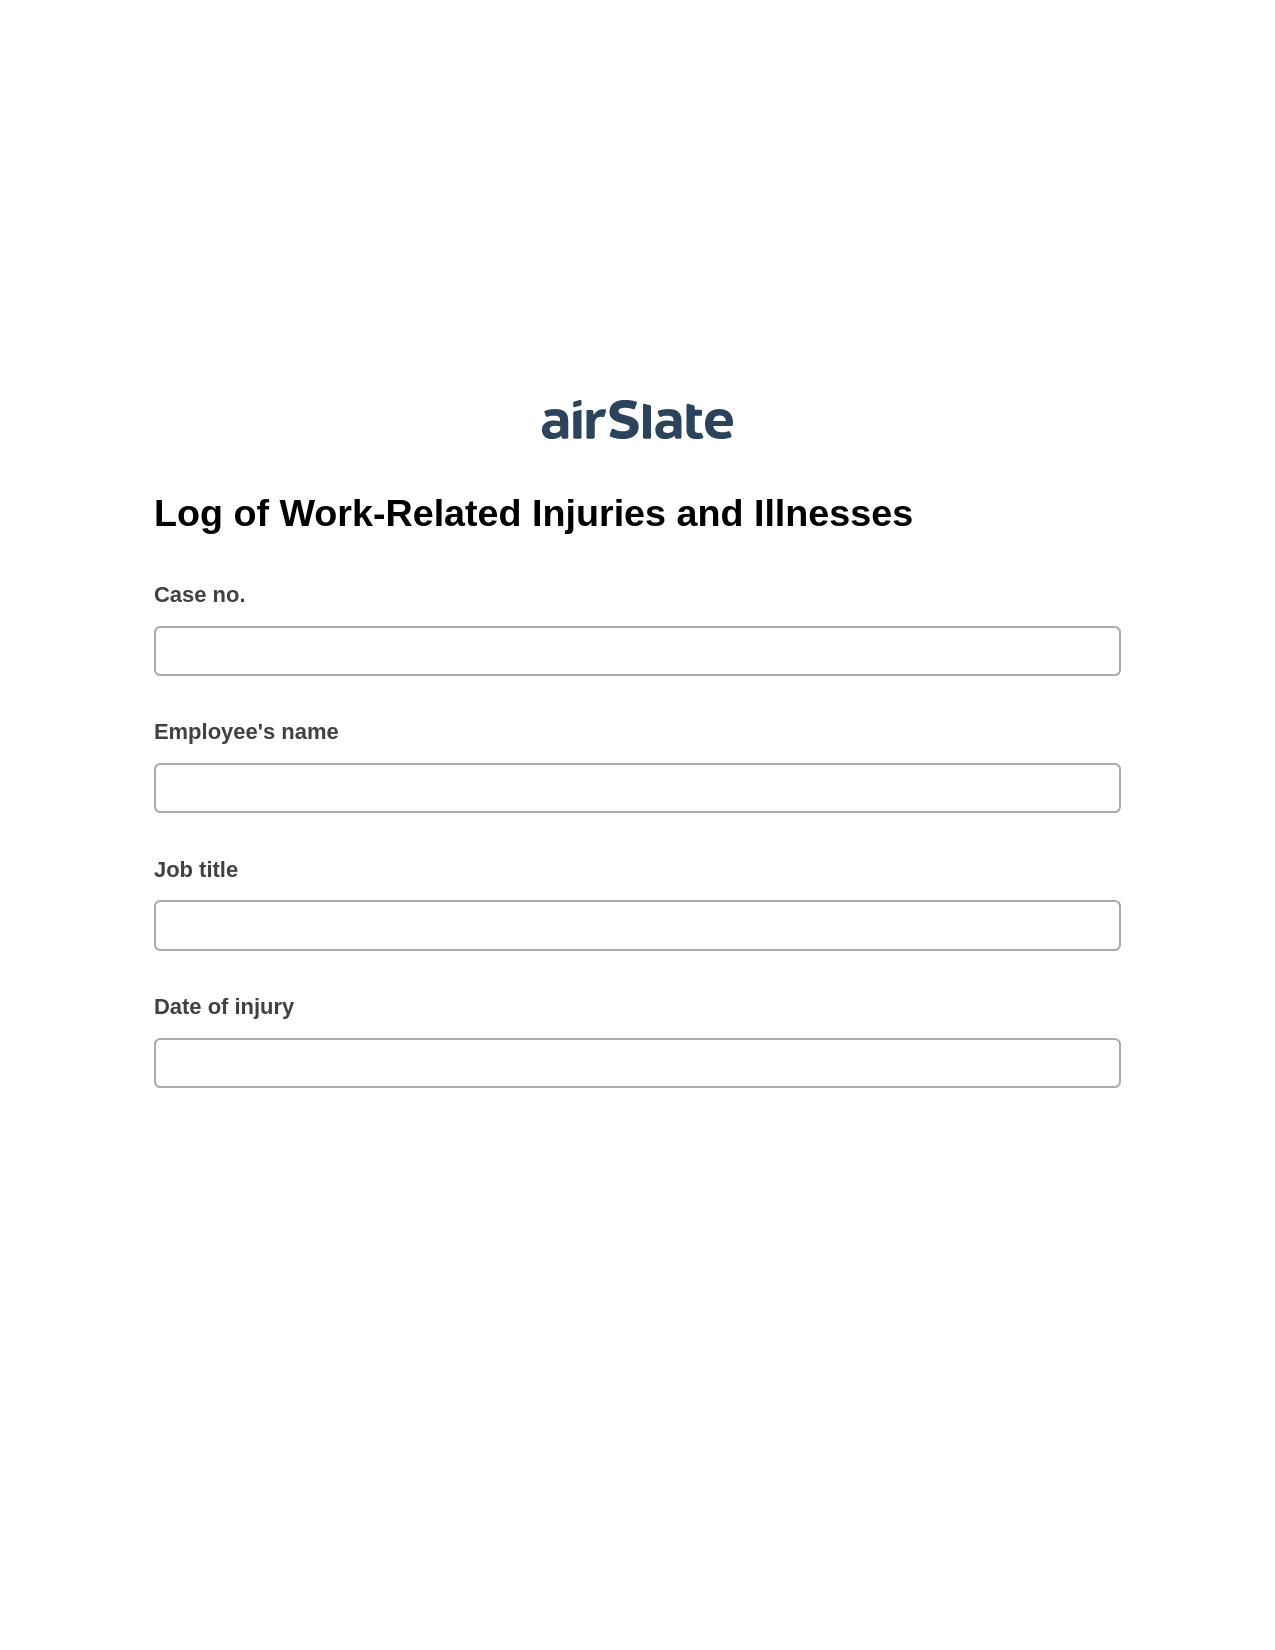 Log of Work-Related Injuries and Illnesses Pre-fill Dropdown from Airtable, Reminder Bot, Export to Excel 365 Bot